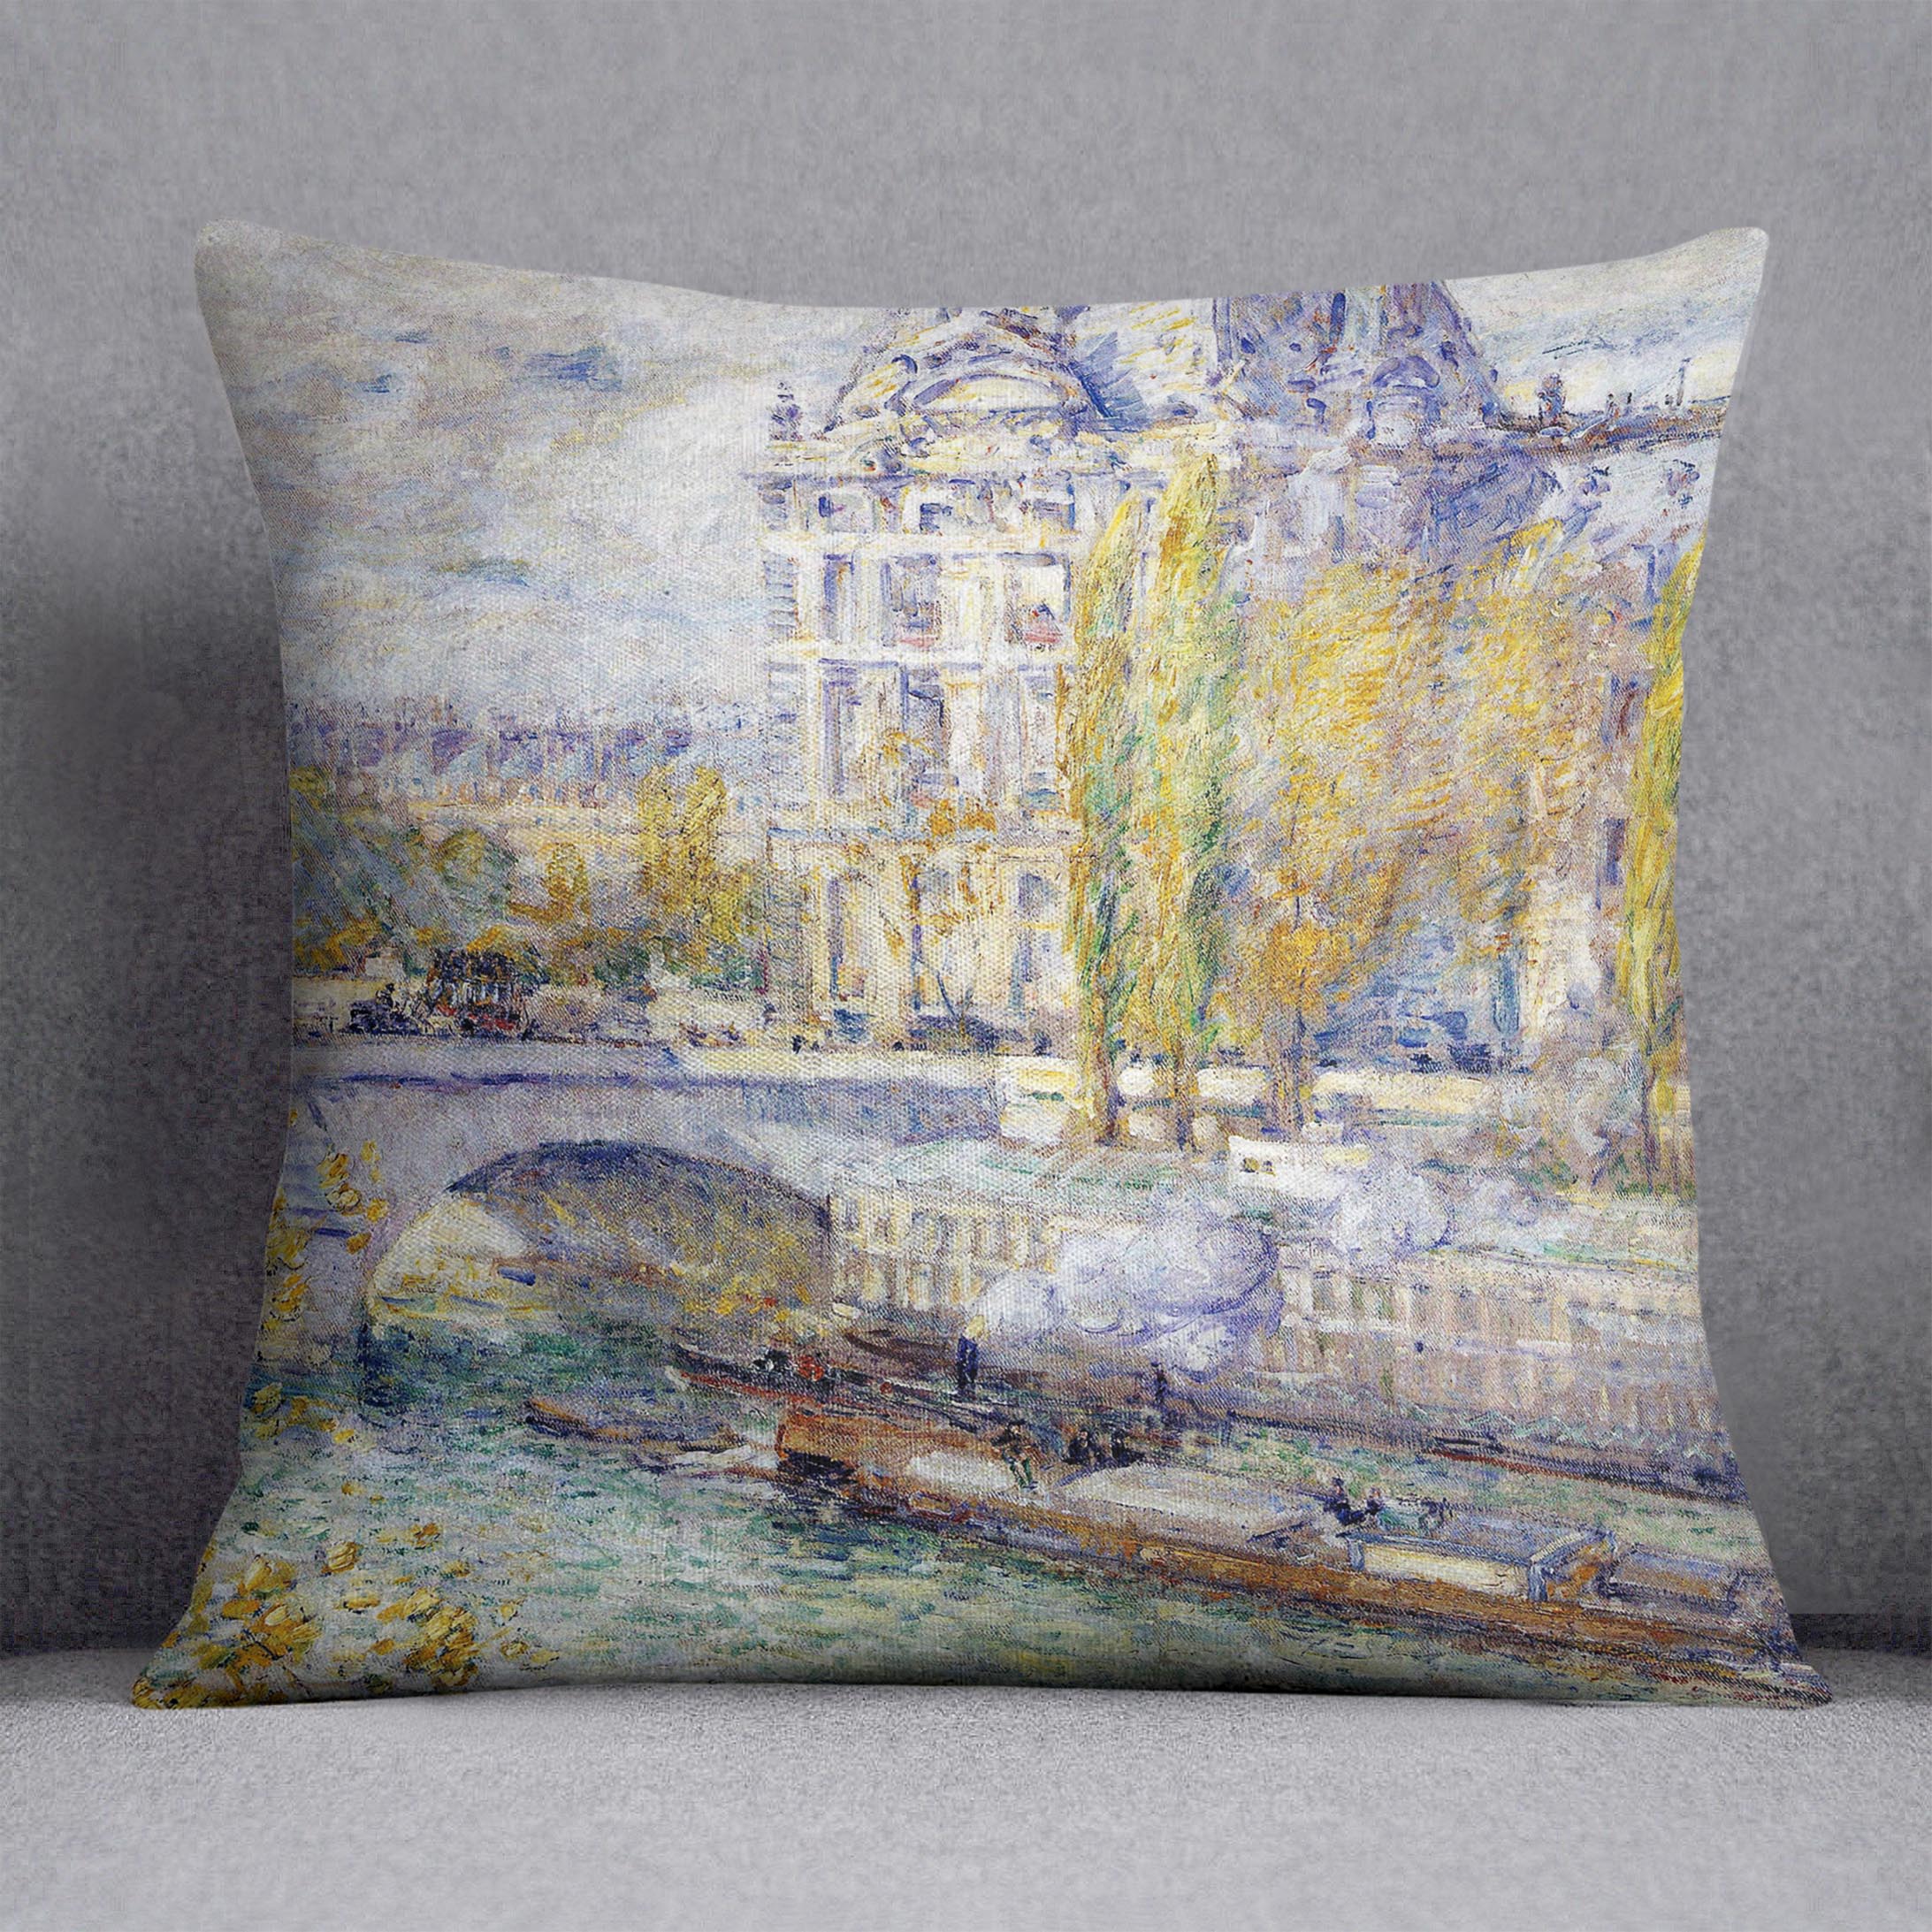 The Louvre on Pont Royal by Hassam Cushion - Canvas Art Rocks - 1